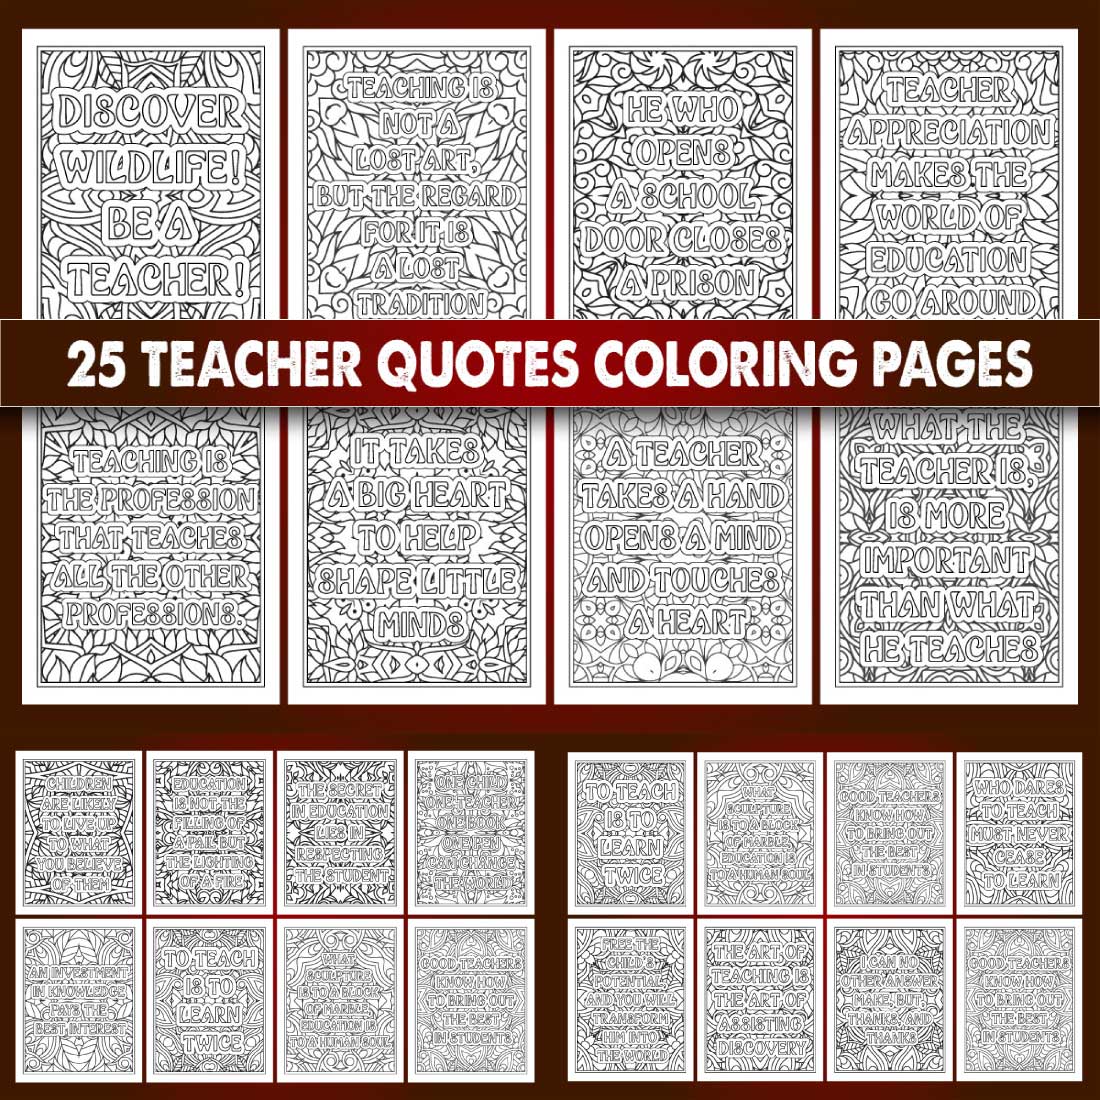 Teachers Quotes Coloring Page cover image.